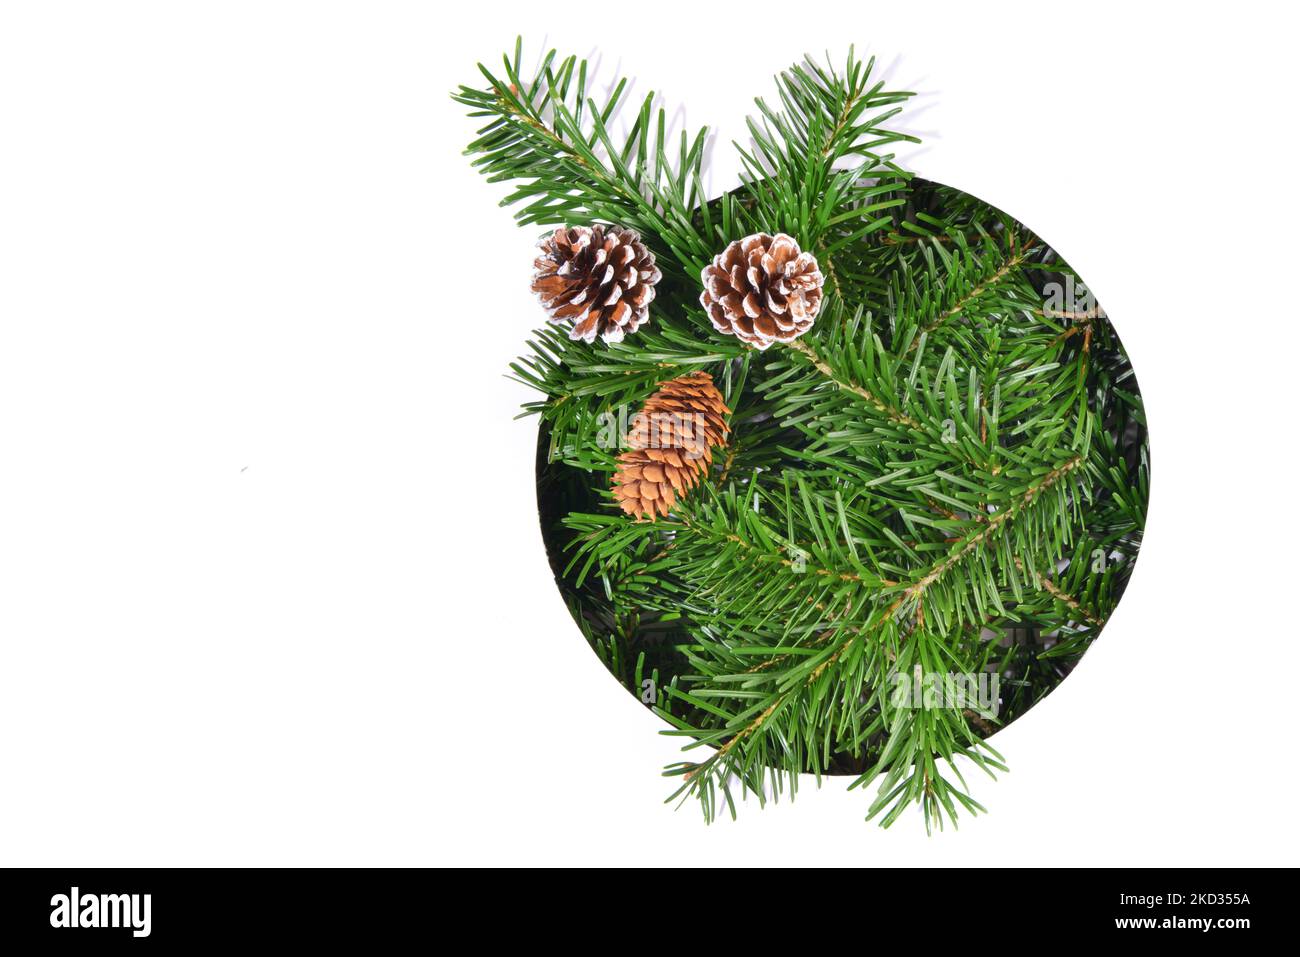 Christmas Fir Branches through round white Paper, with Fir Cones, isolated on white Background. Stock Photo